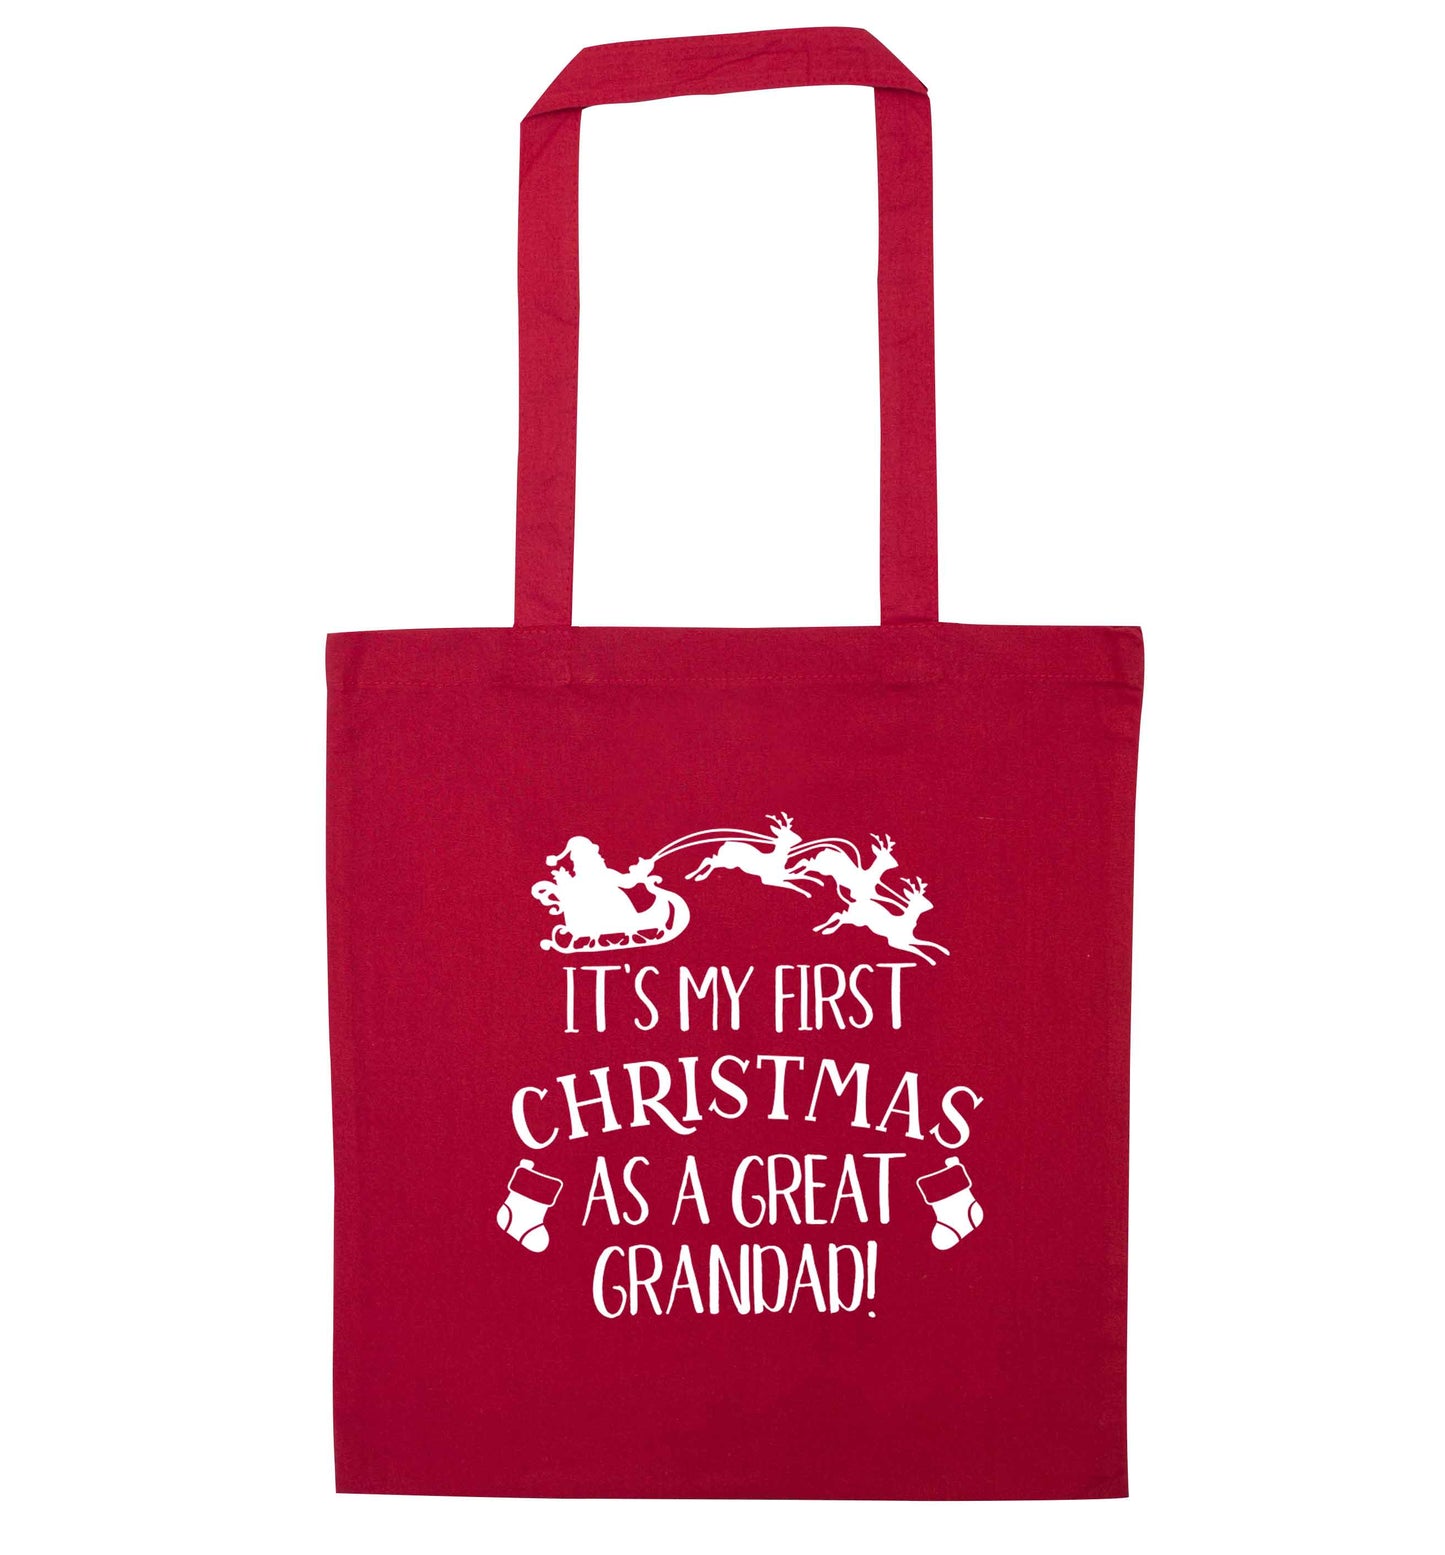 It's my first Christmas as a great grandad! red tote bag